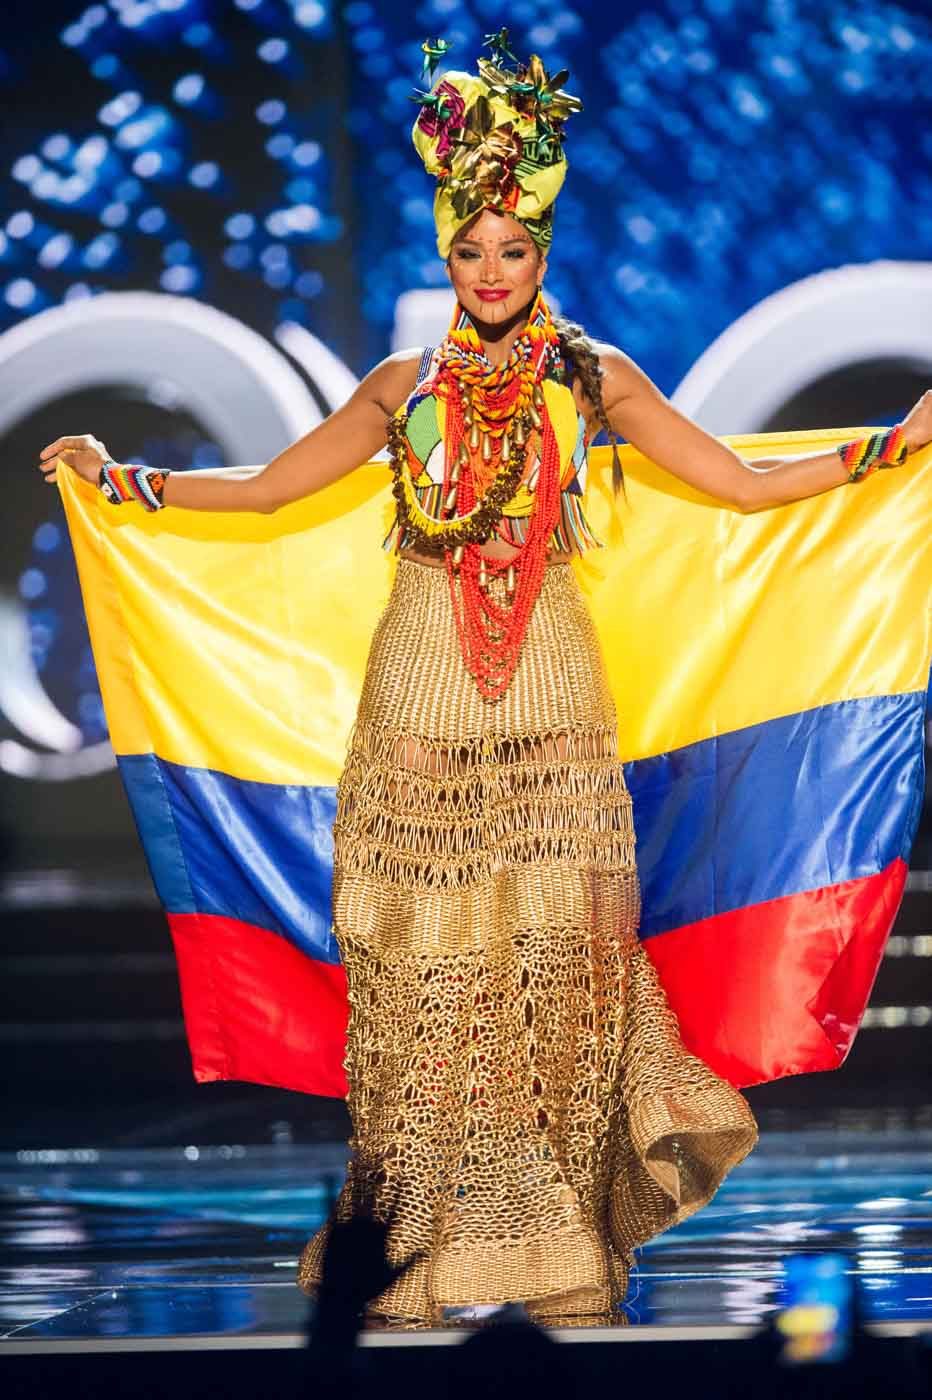 Andrea Tovar, Miss Colombia 2016 